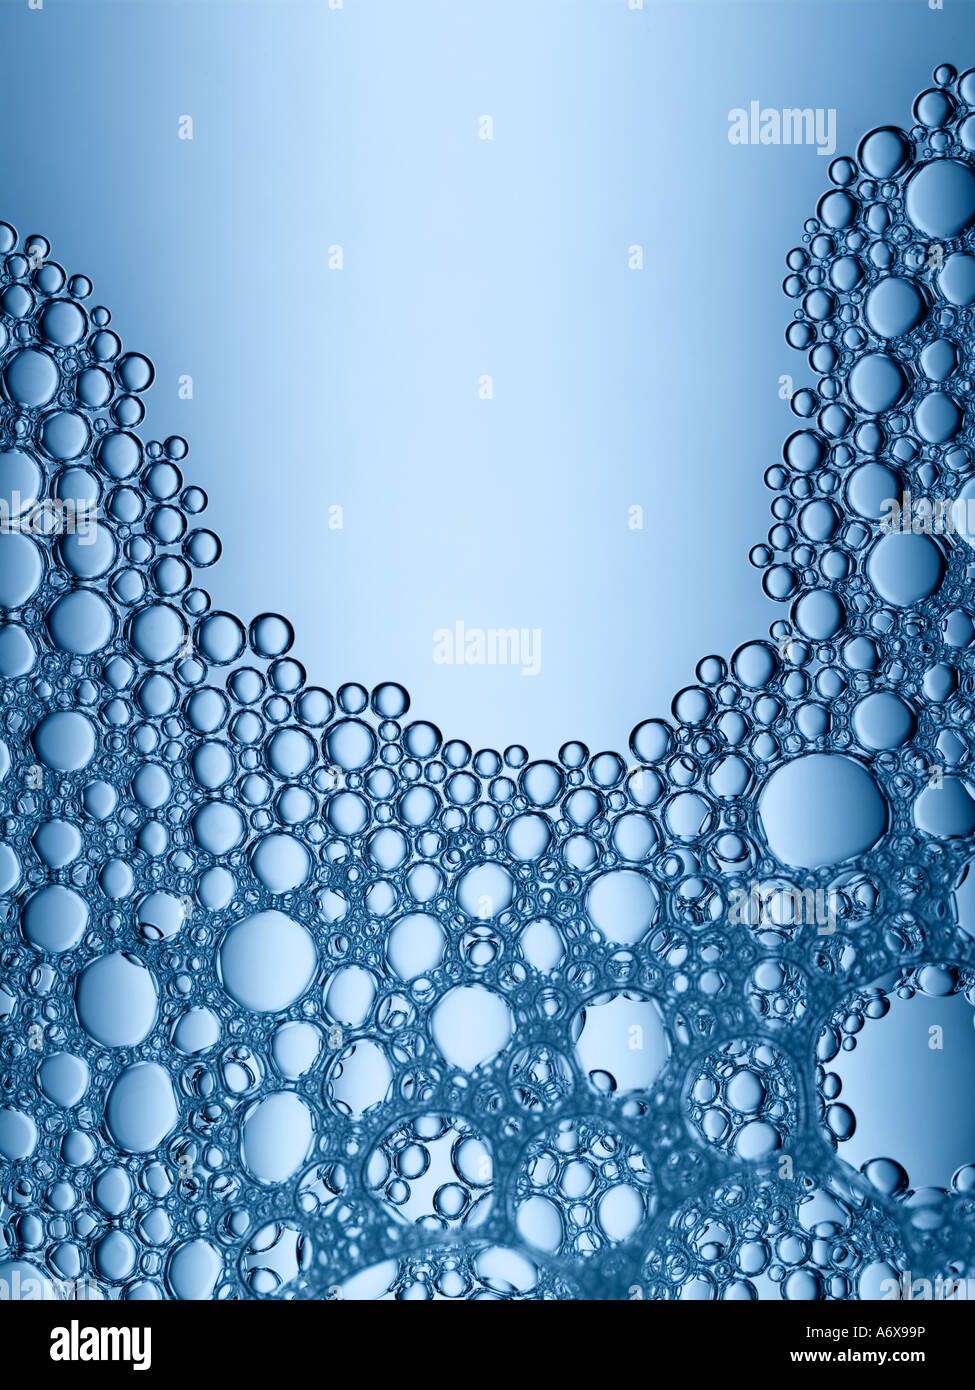 A close up of some blue bubbles Stock Photo